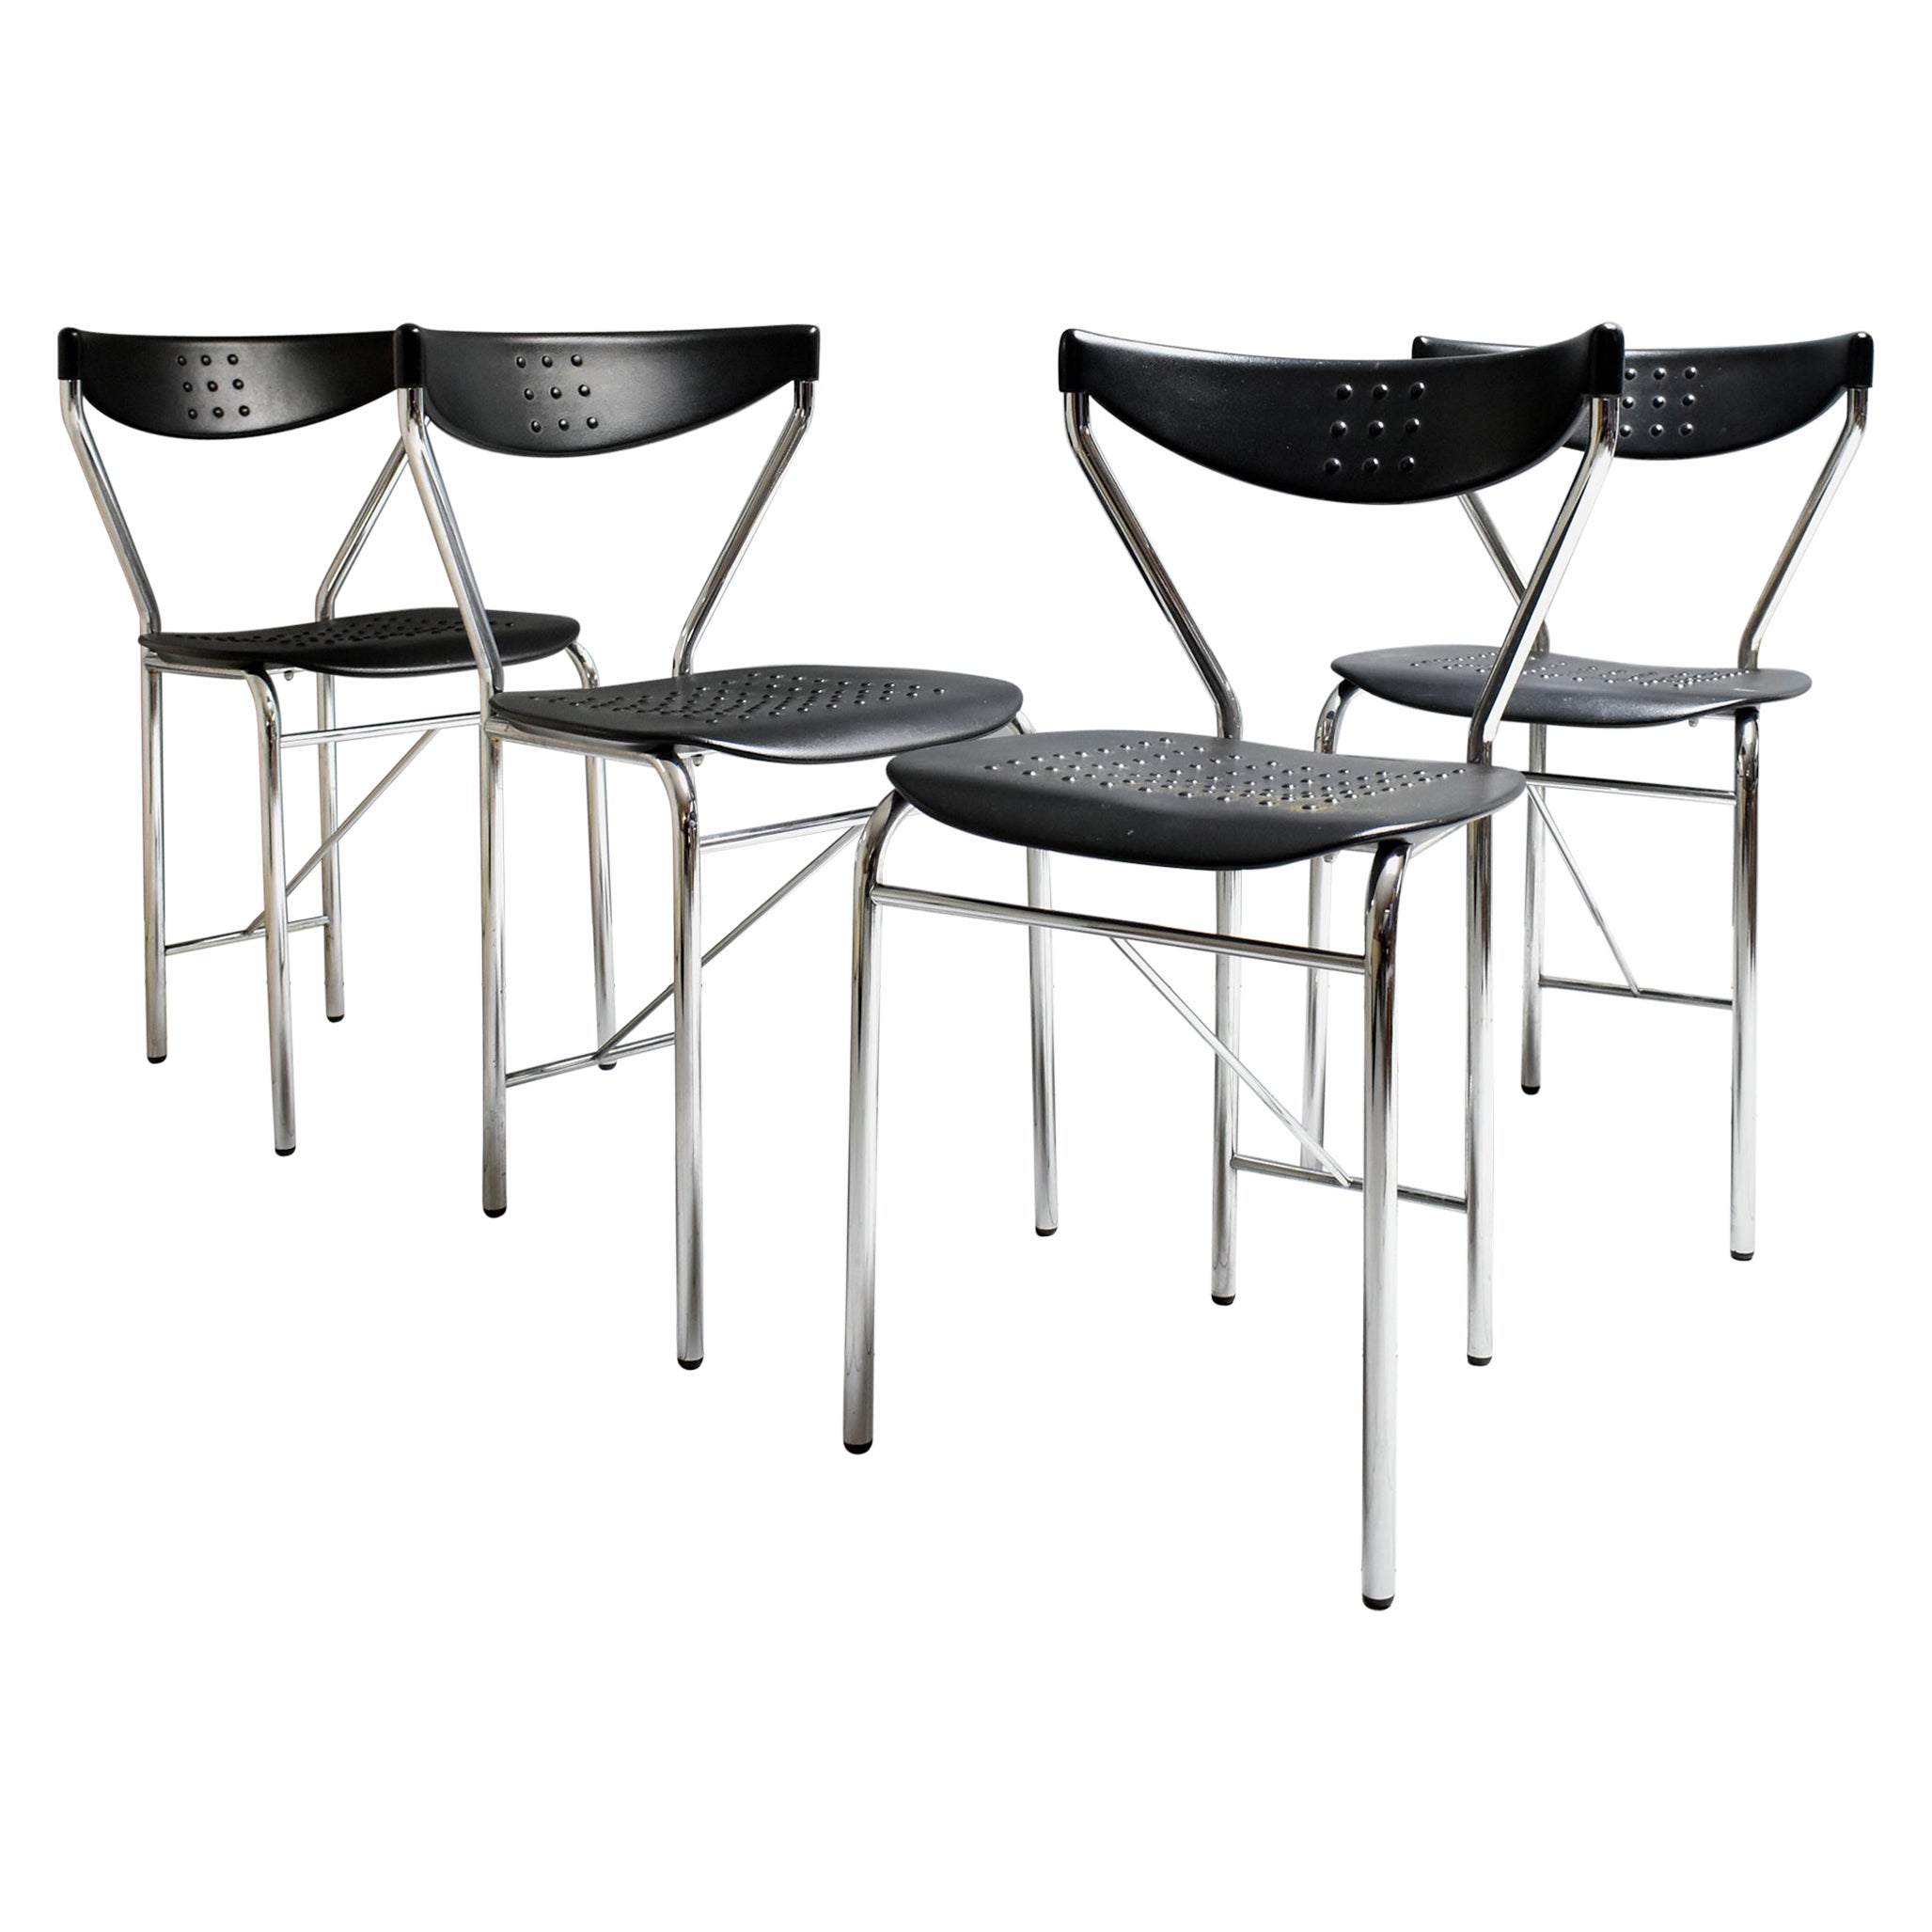 Mid-Century Modern Italian, Set of 4 Dining Chairs by Citterio Cucine, 1980 For Sale